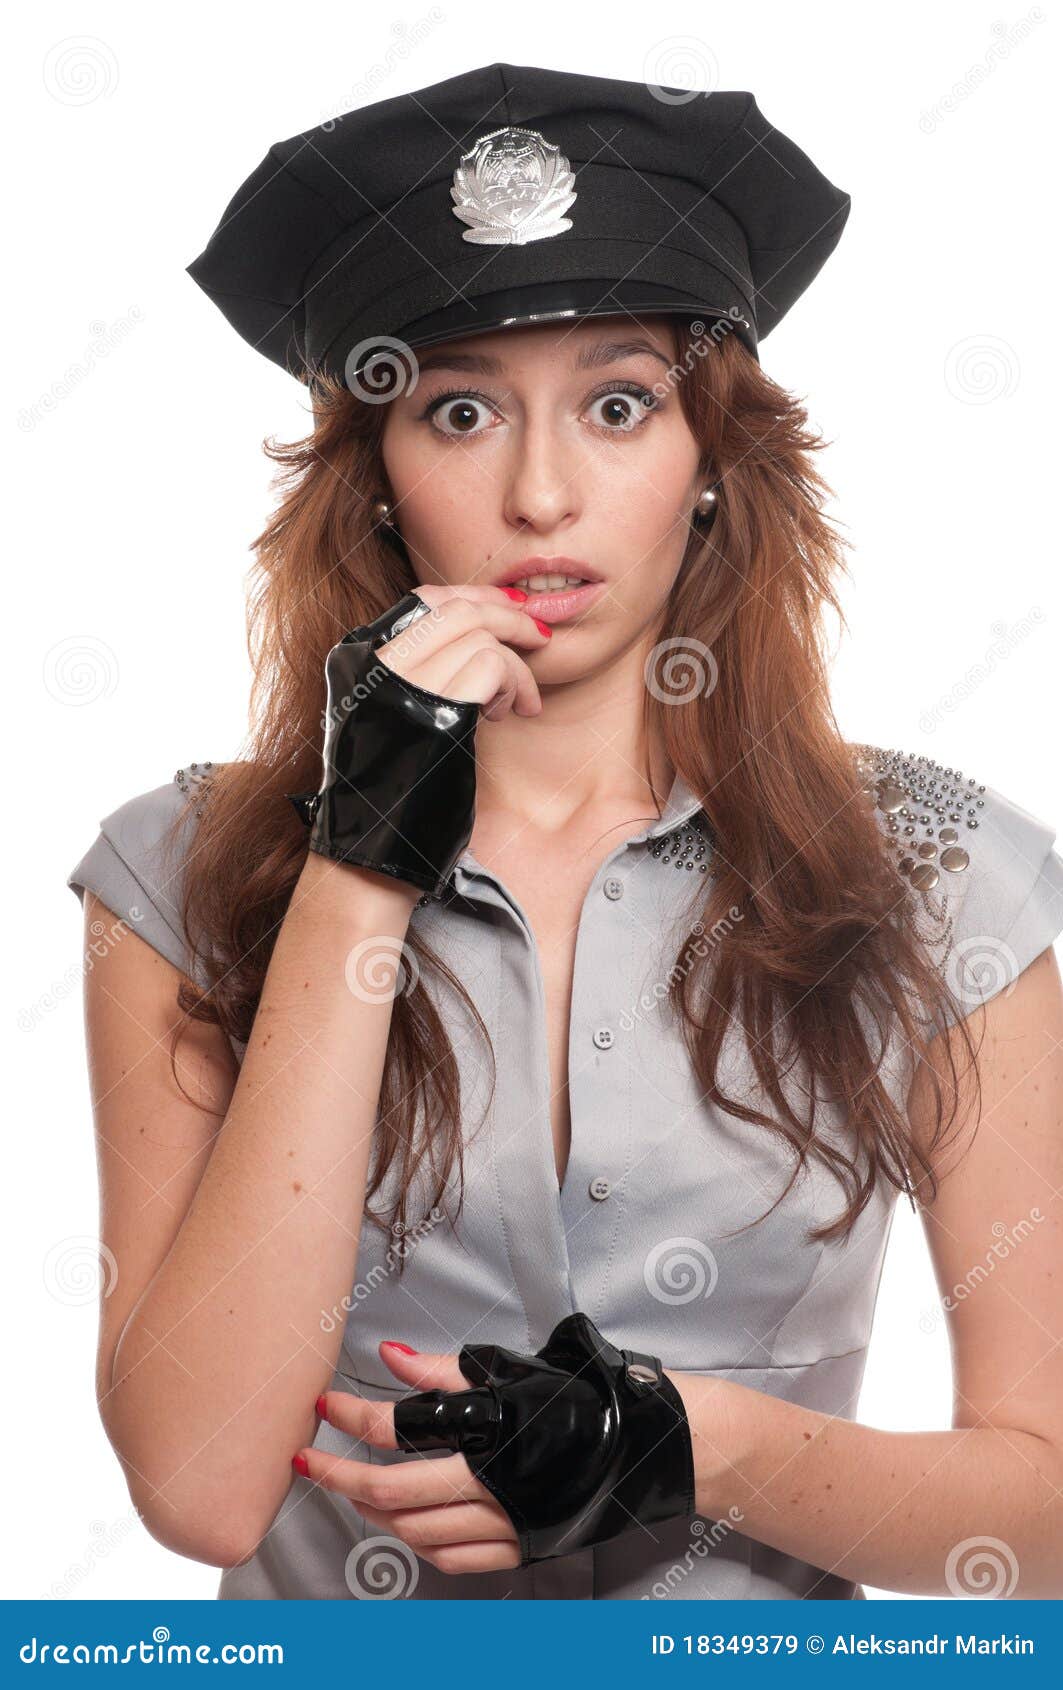 Beautiful Police Woman In Costume Stock Image Image Of Lingerie Lady 18349379